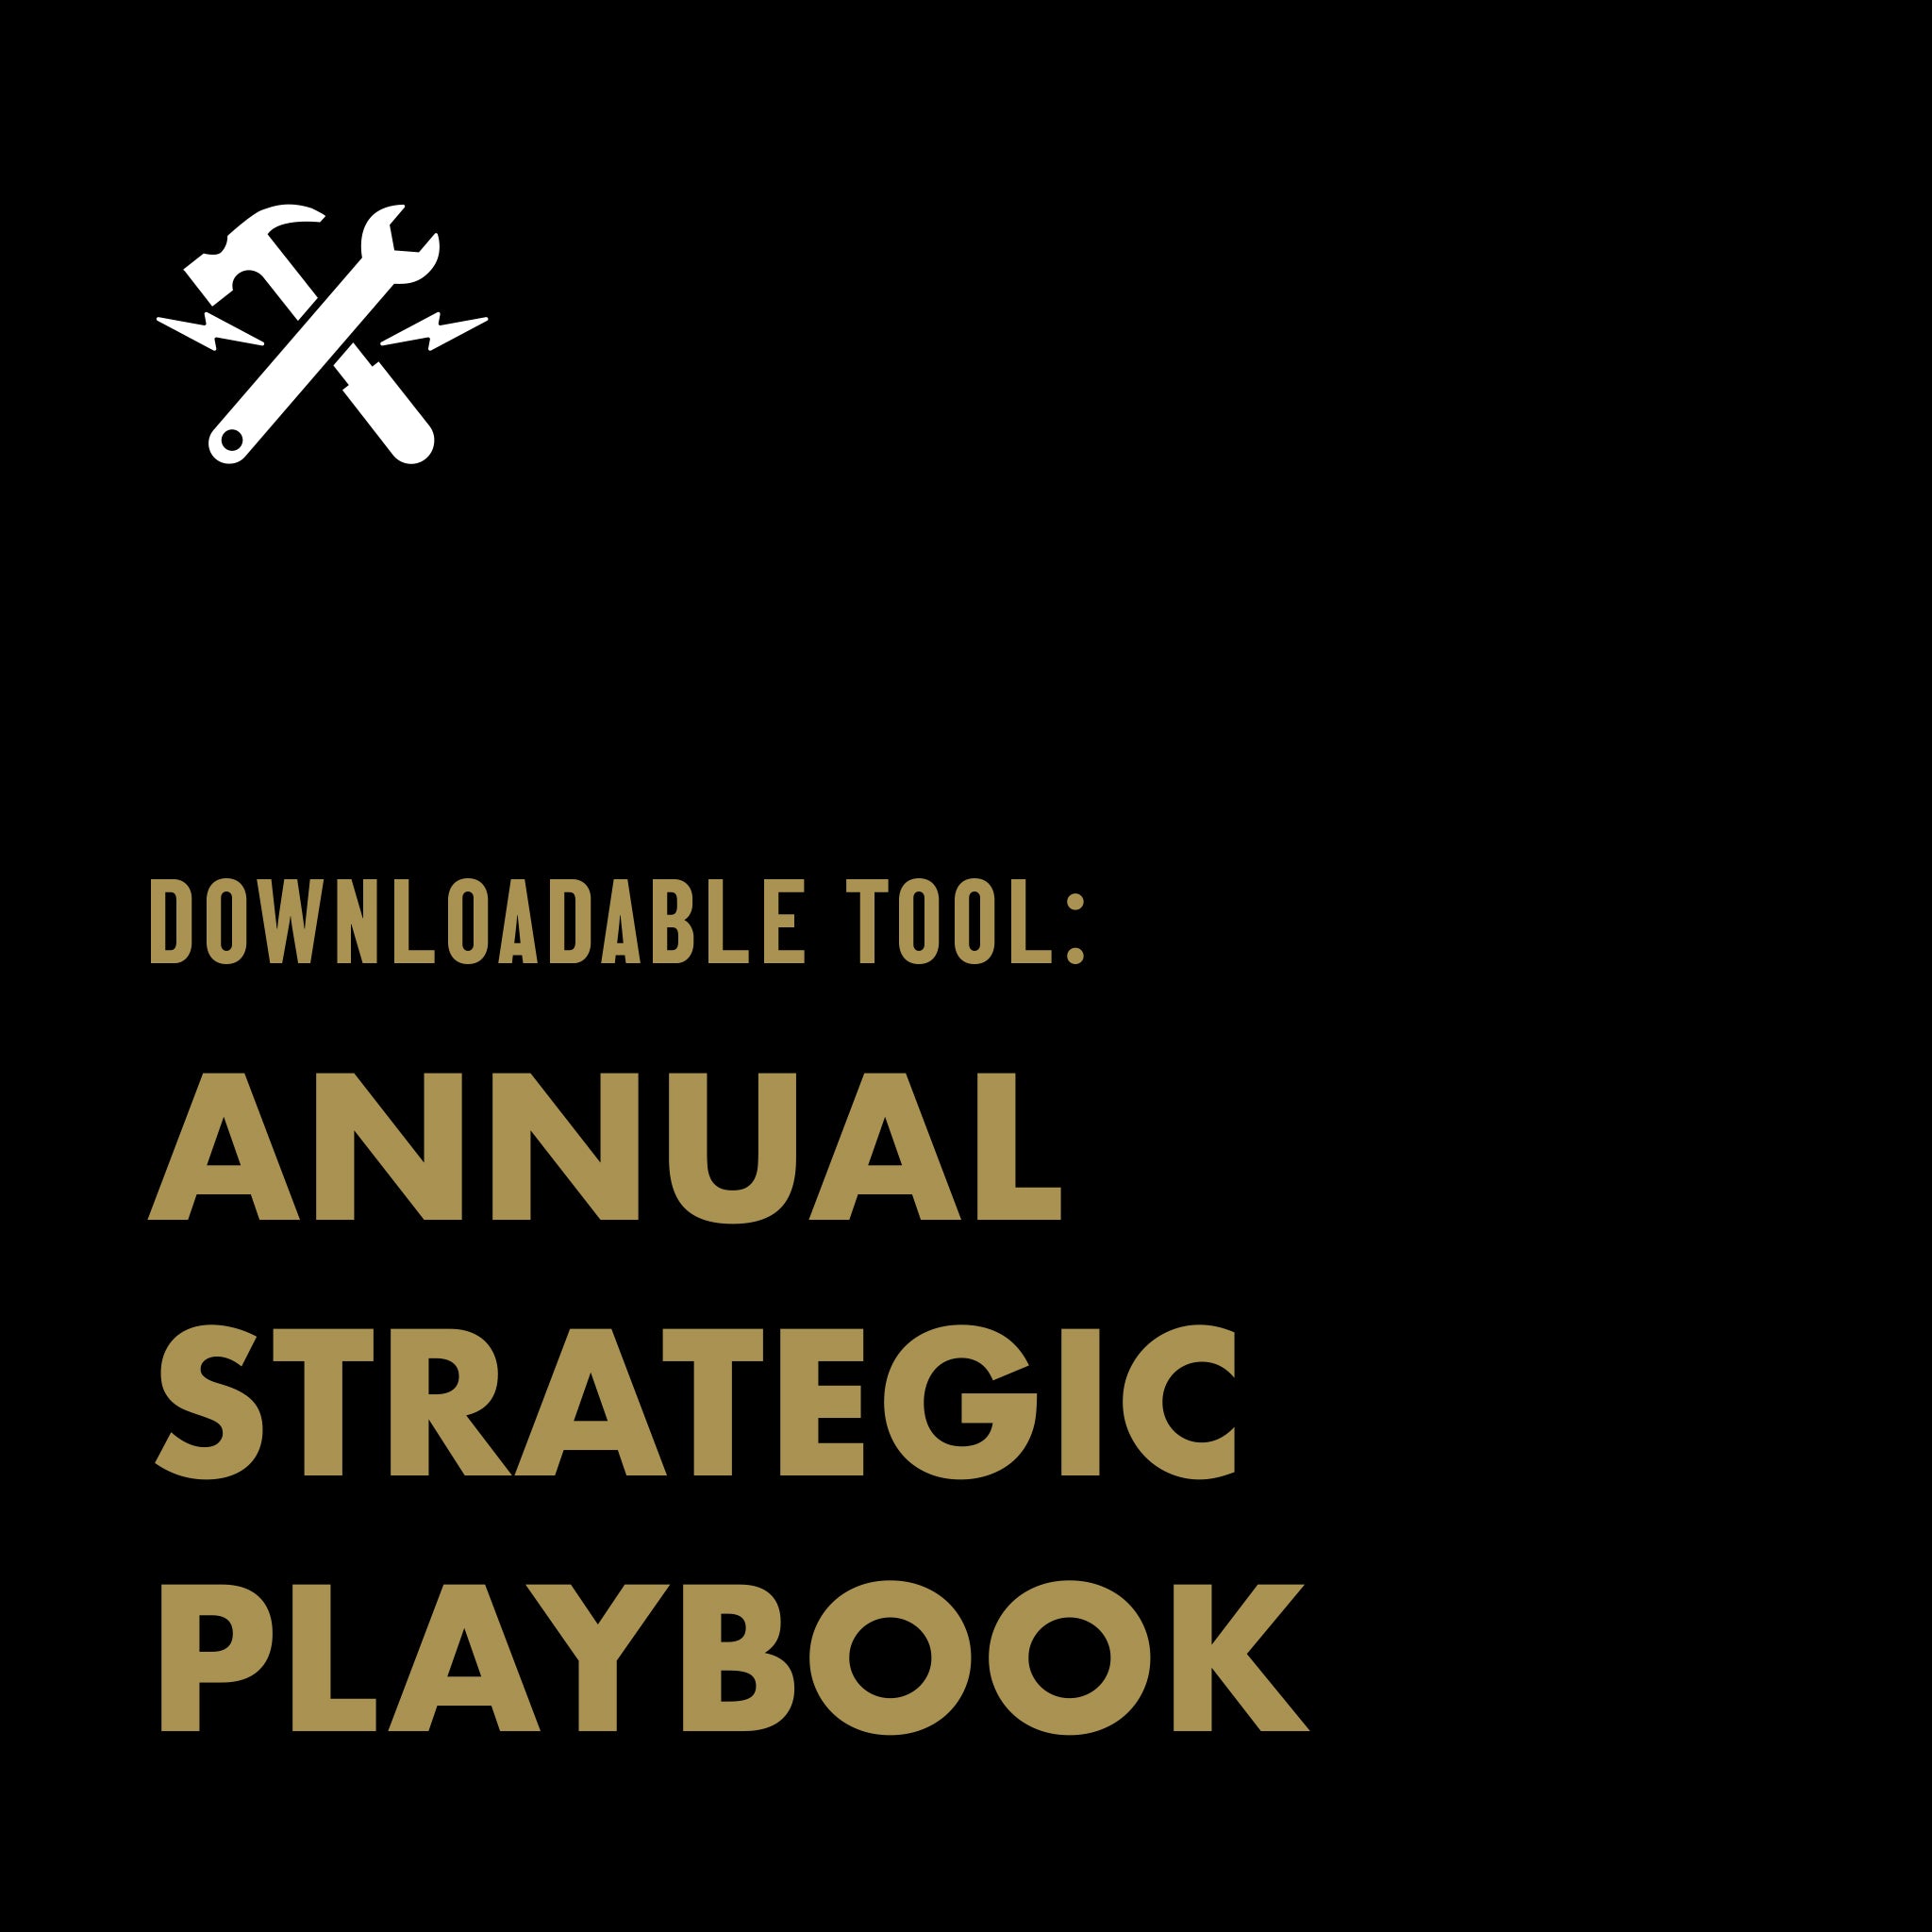 DOWNLOADABLE TOOL: Annual Strategic Playbook